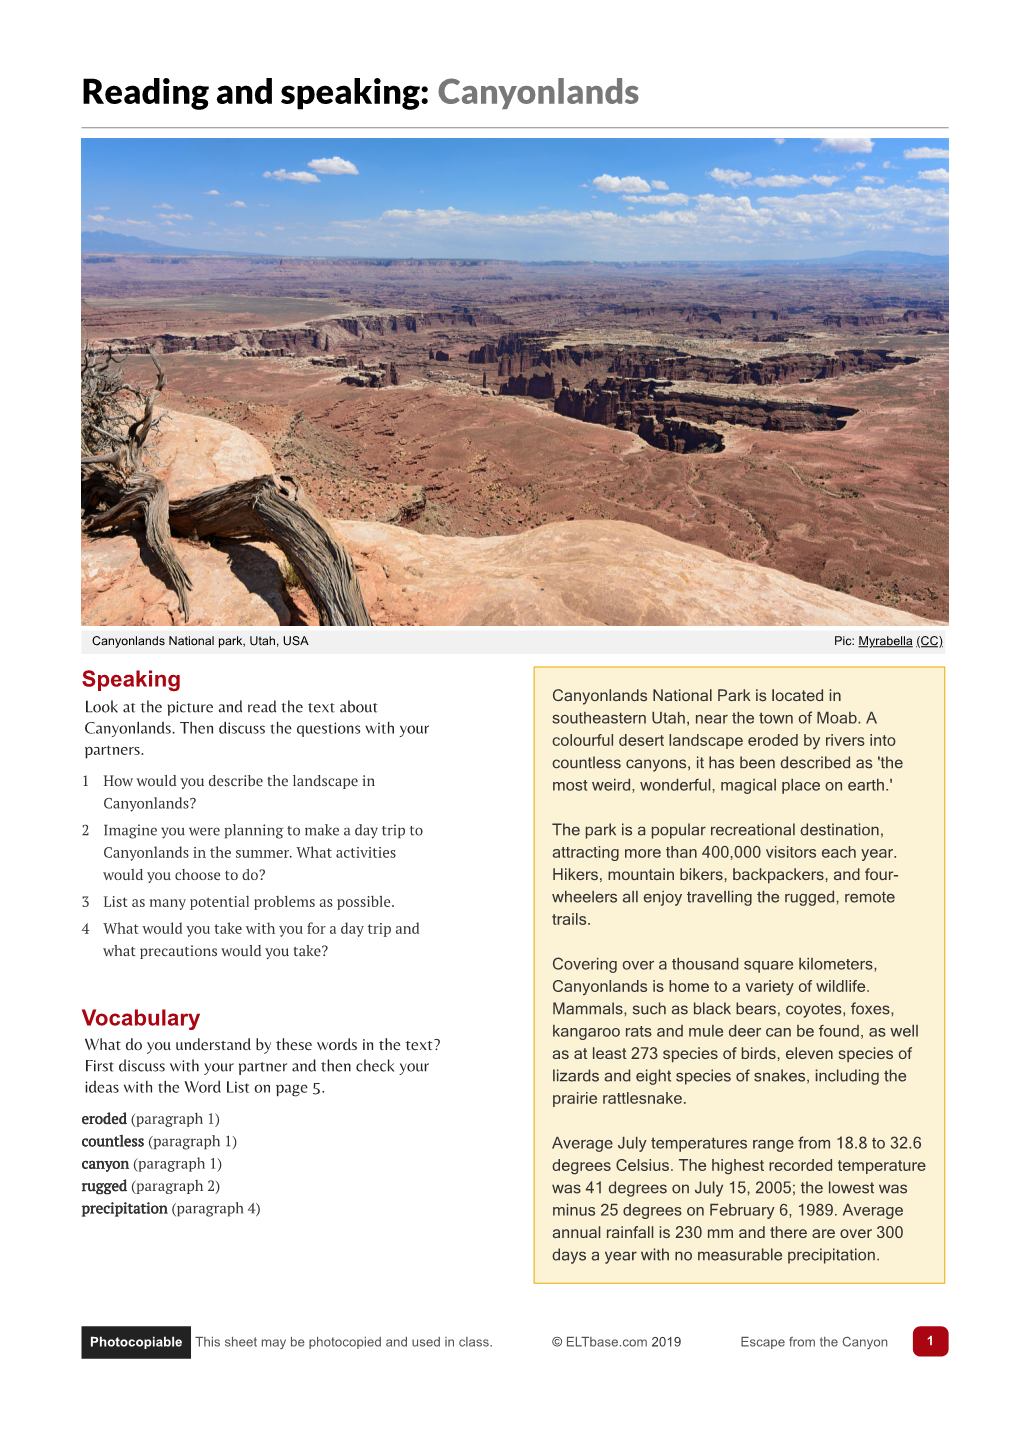 Reading and Speaking: Canyonlands